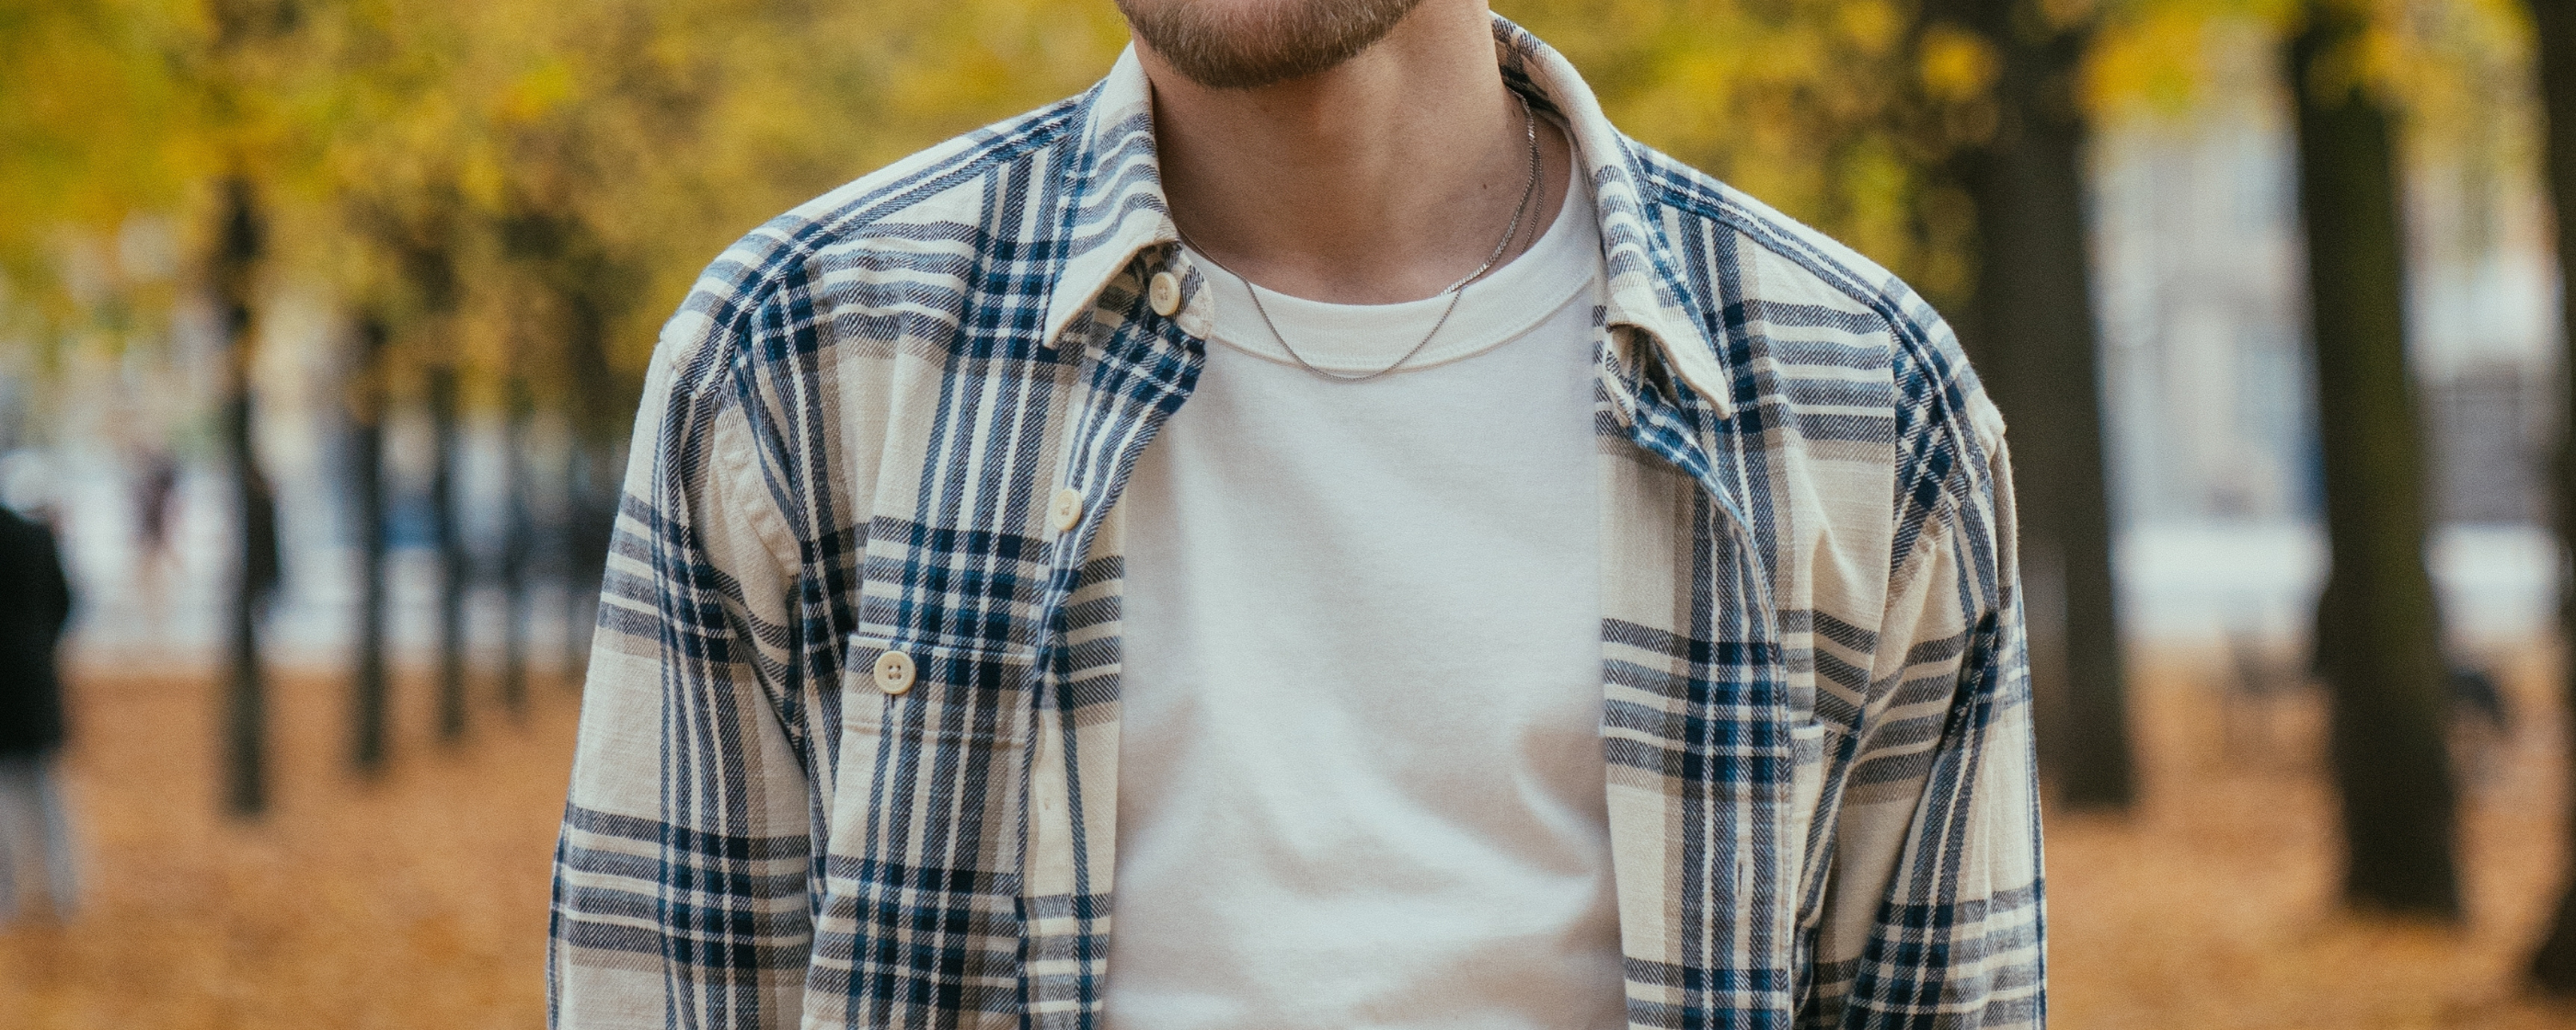 Closeup of a man wearing a t-shirt and flannel overshirt.